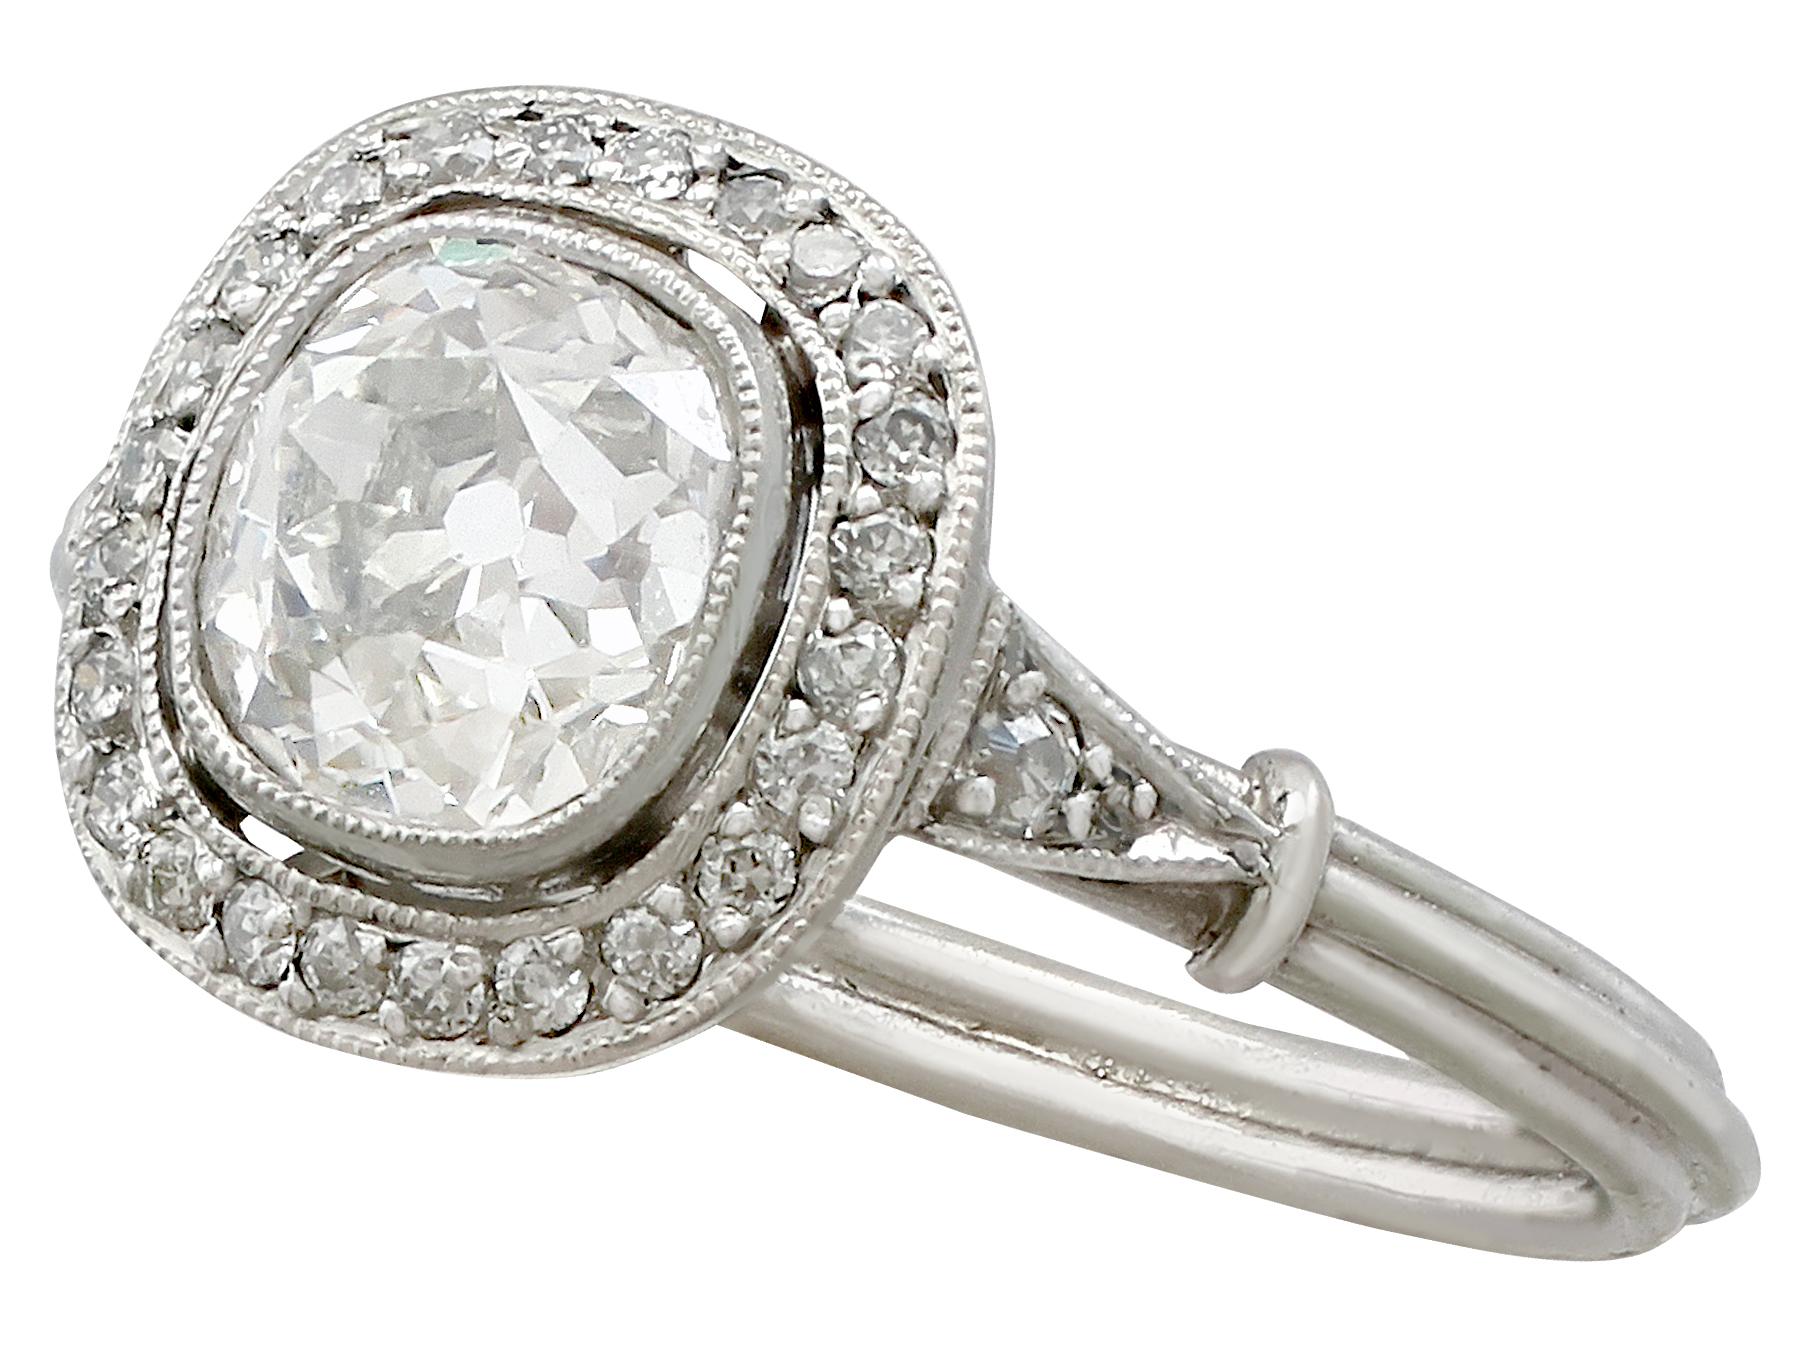 Women's or Men's Antique and Contemporary 1.48 Carat Diamond and Platinum Halo Ring